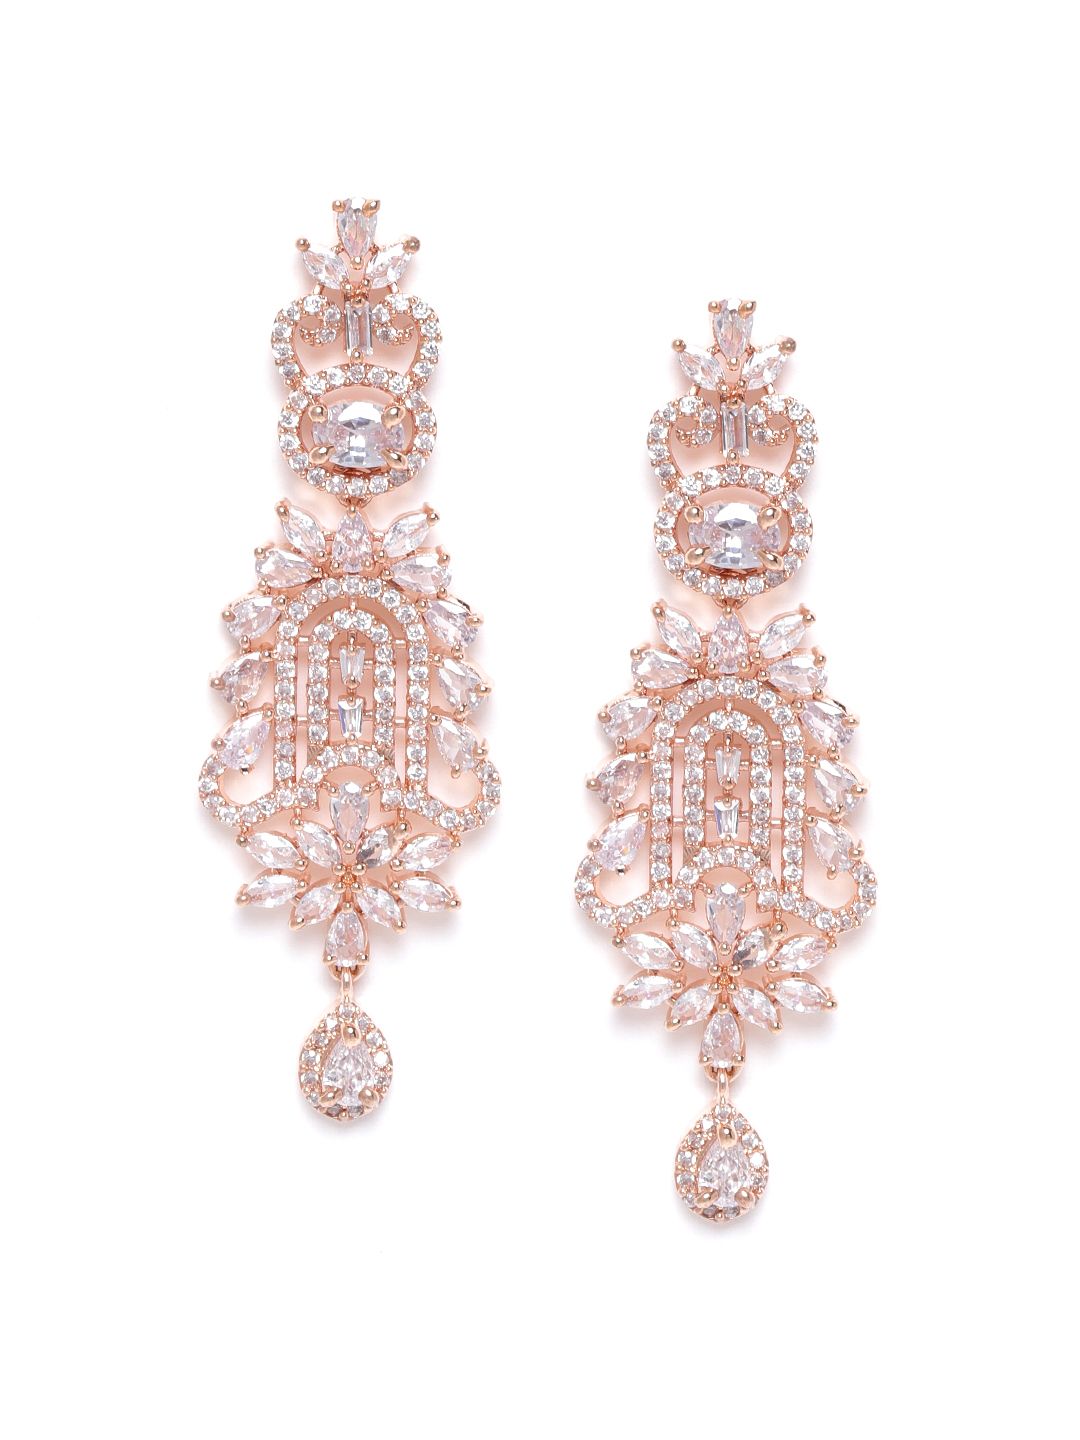 Carlton London Rose Gold-Plated CZ Studded Contemporary Drop Earrings Price in India